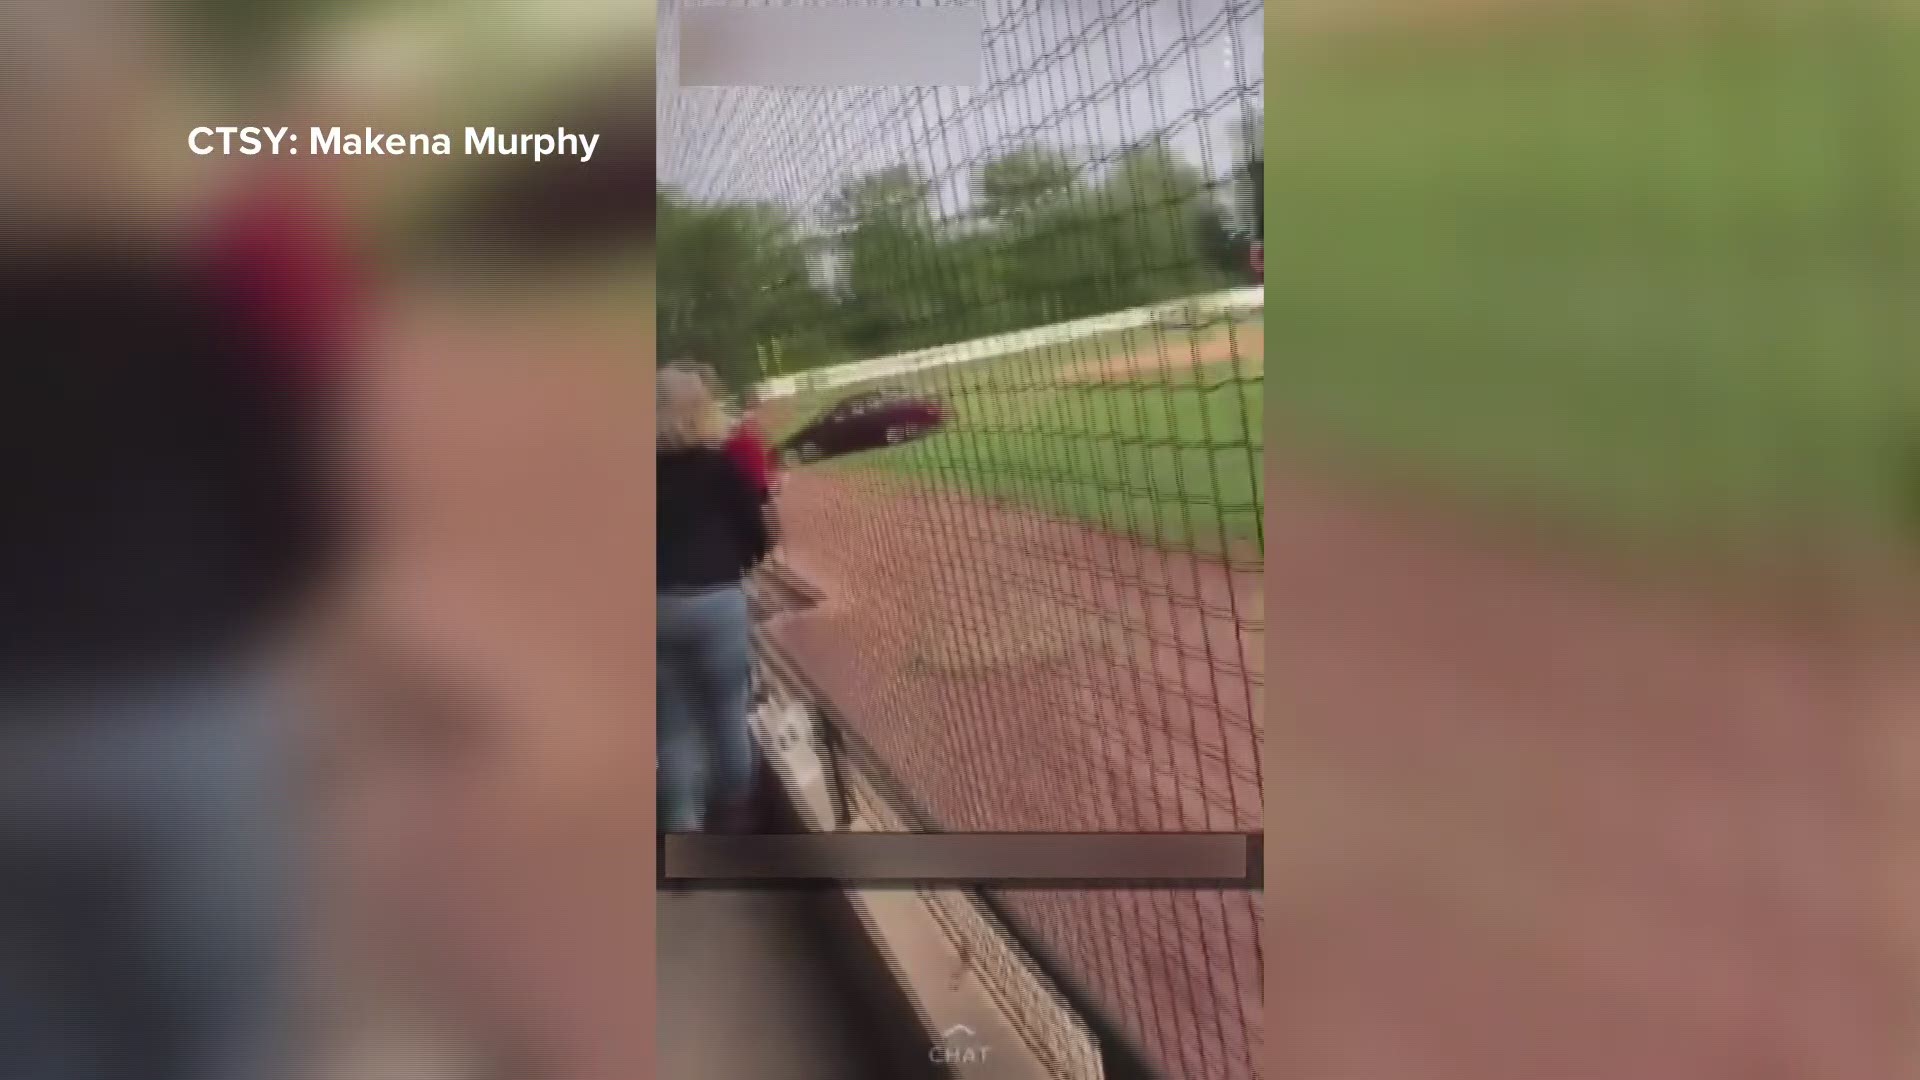 WATCH: Witness captures video of erratic driver on Sanford baseball field